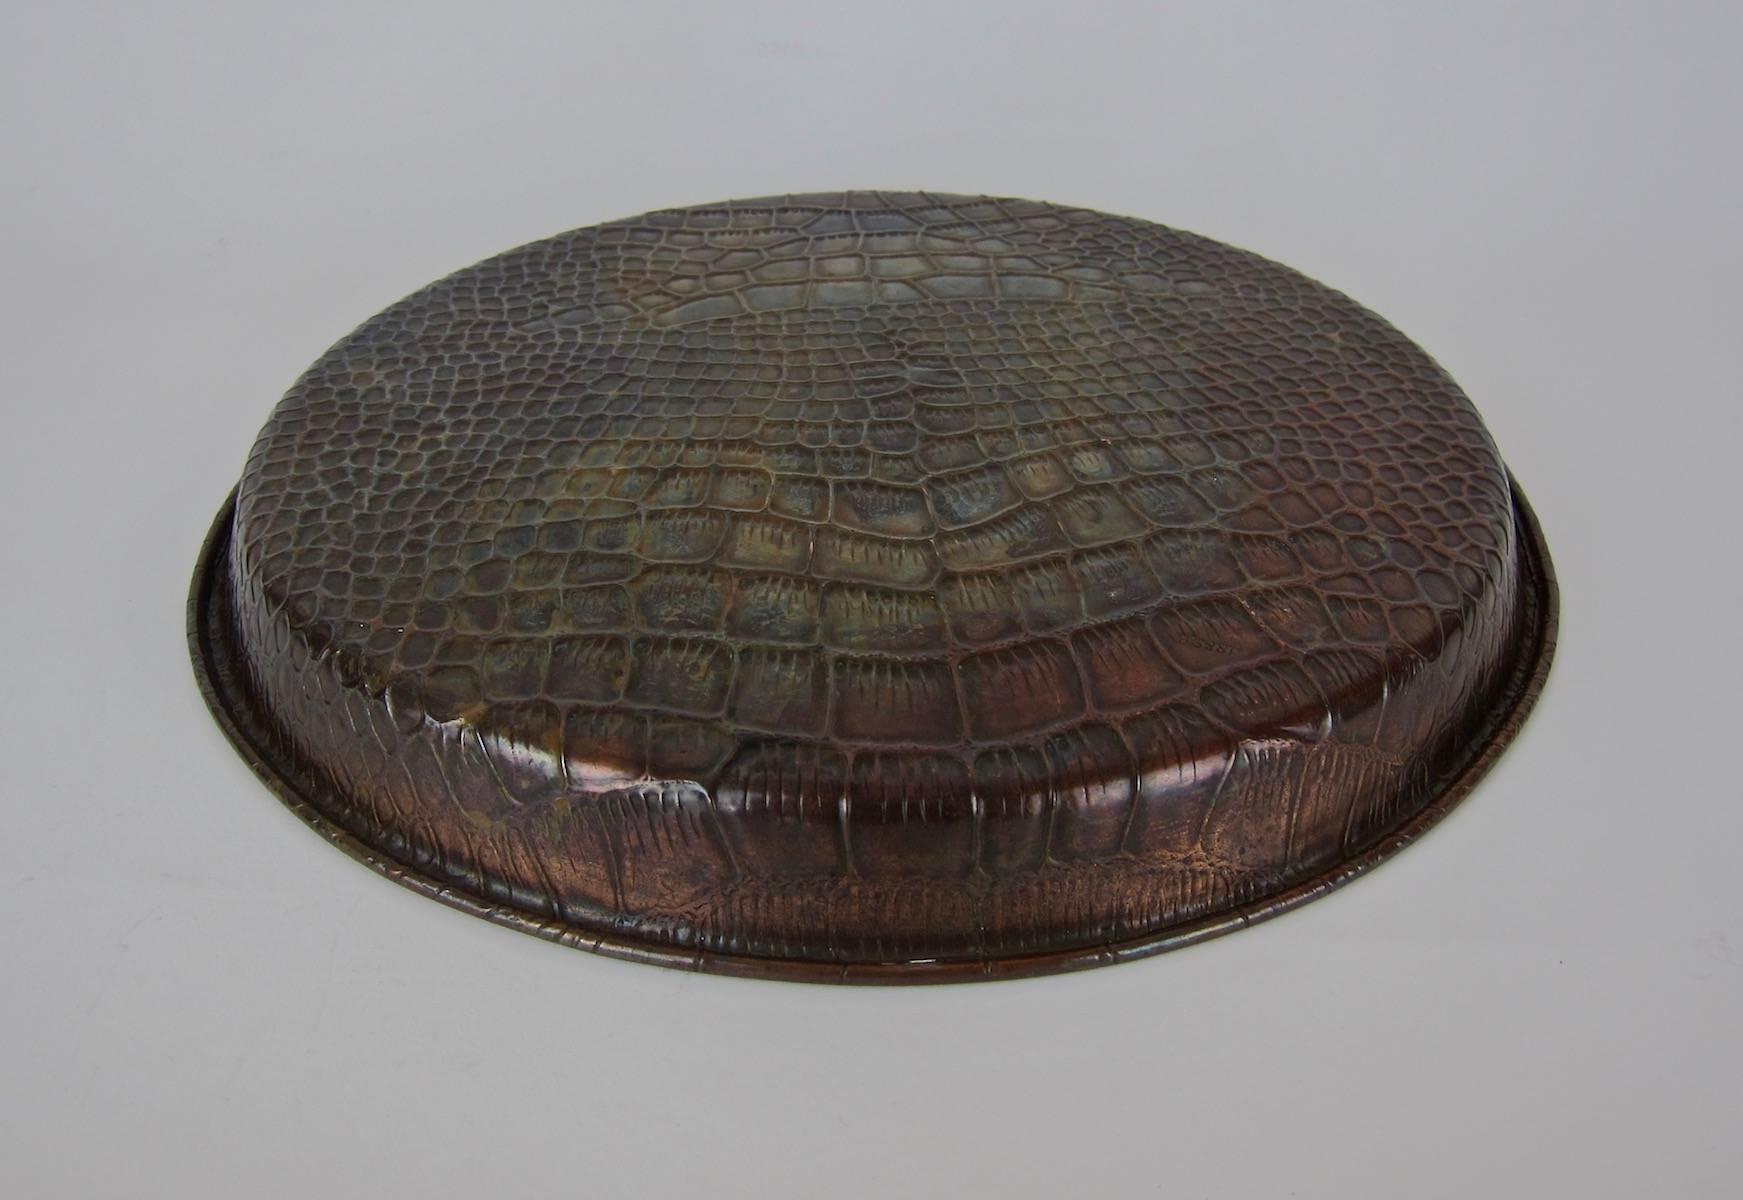 Arts and Crafts English Art Deco Snakeskin Copper Serving Tray from Joseph Sankey & Sons